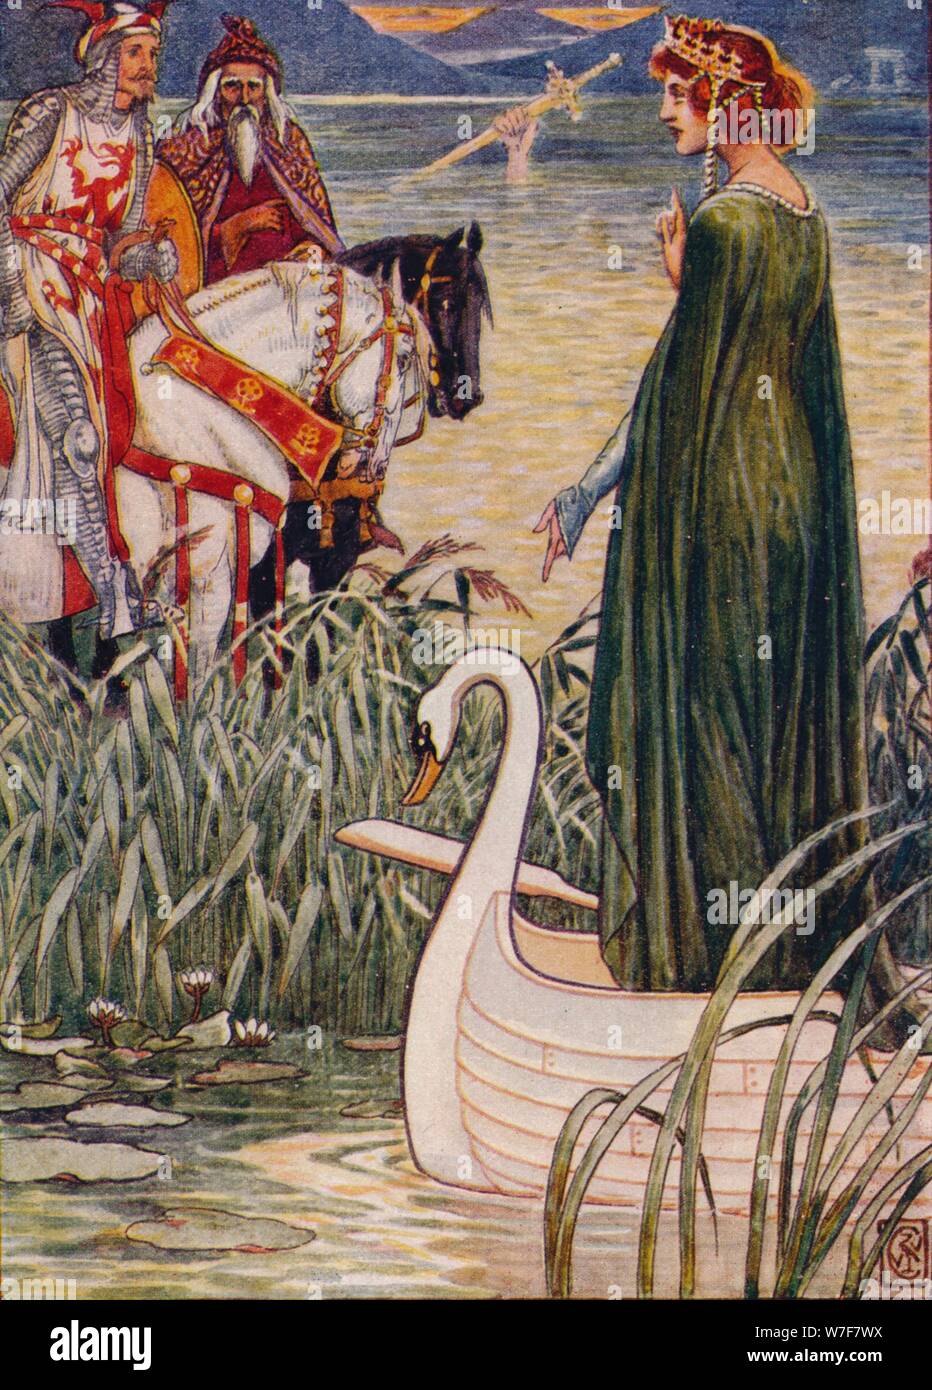 'King Arthur asks the Lady of the Lake for the sword Excalibur', 1911.  Artist: Walter Crane. Stock Photo